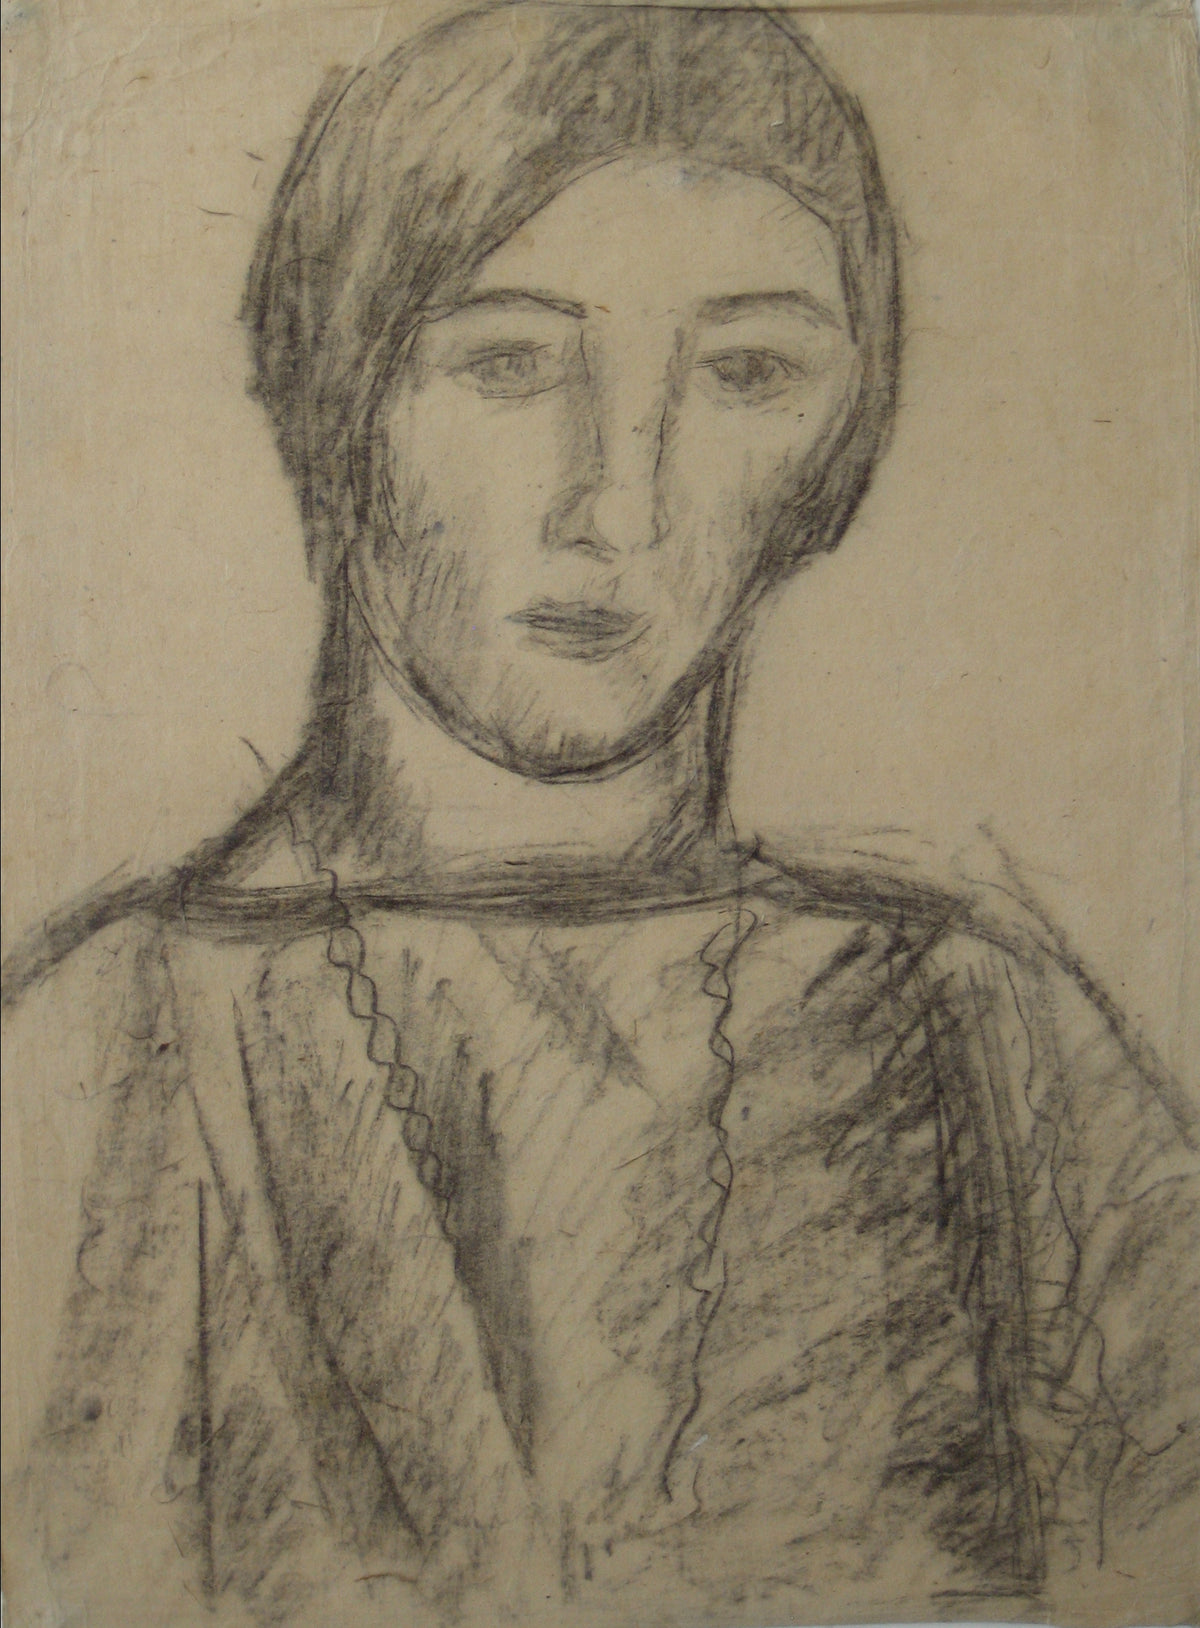 Portrait of a Woman in Charcoal &lt;br&gt;Early-Mid 20th Century&lt;br&gt;&lt;br&gt;#14362